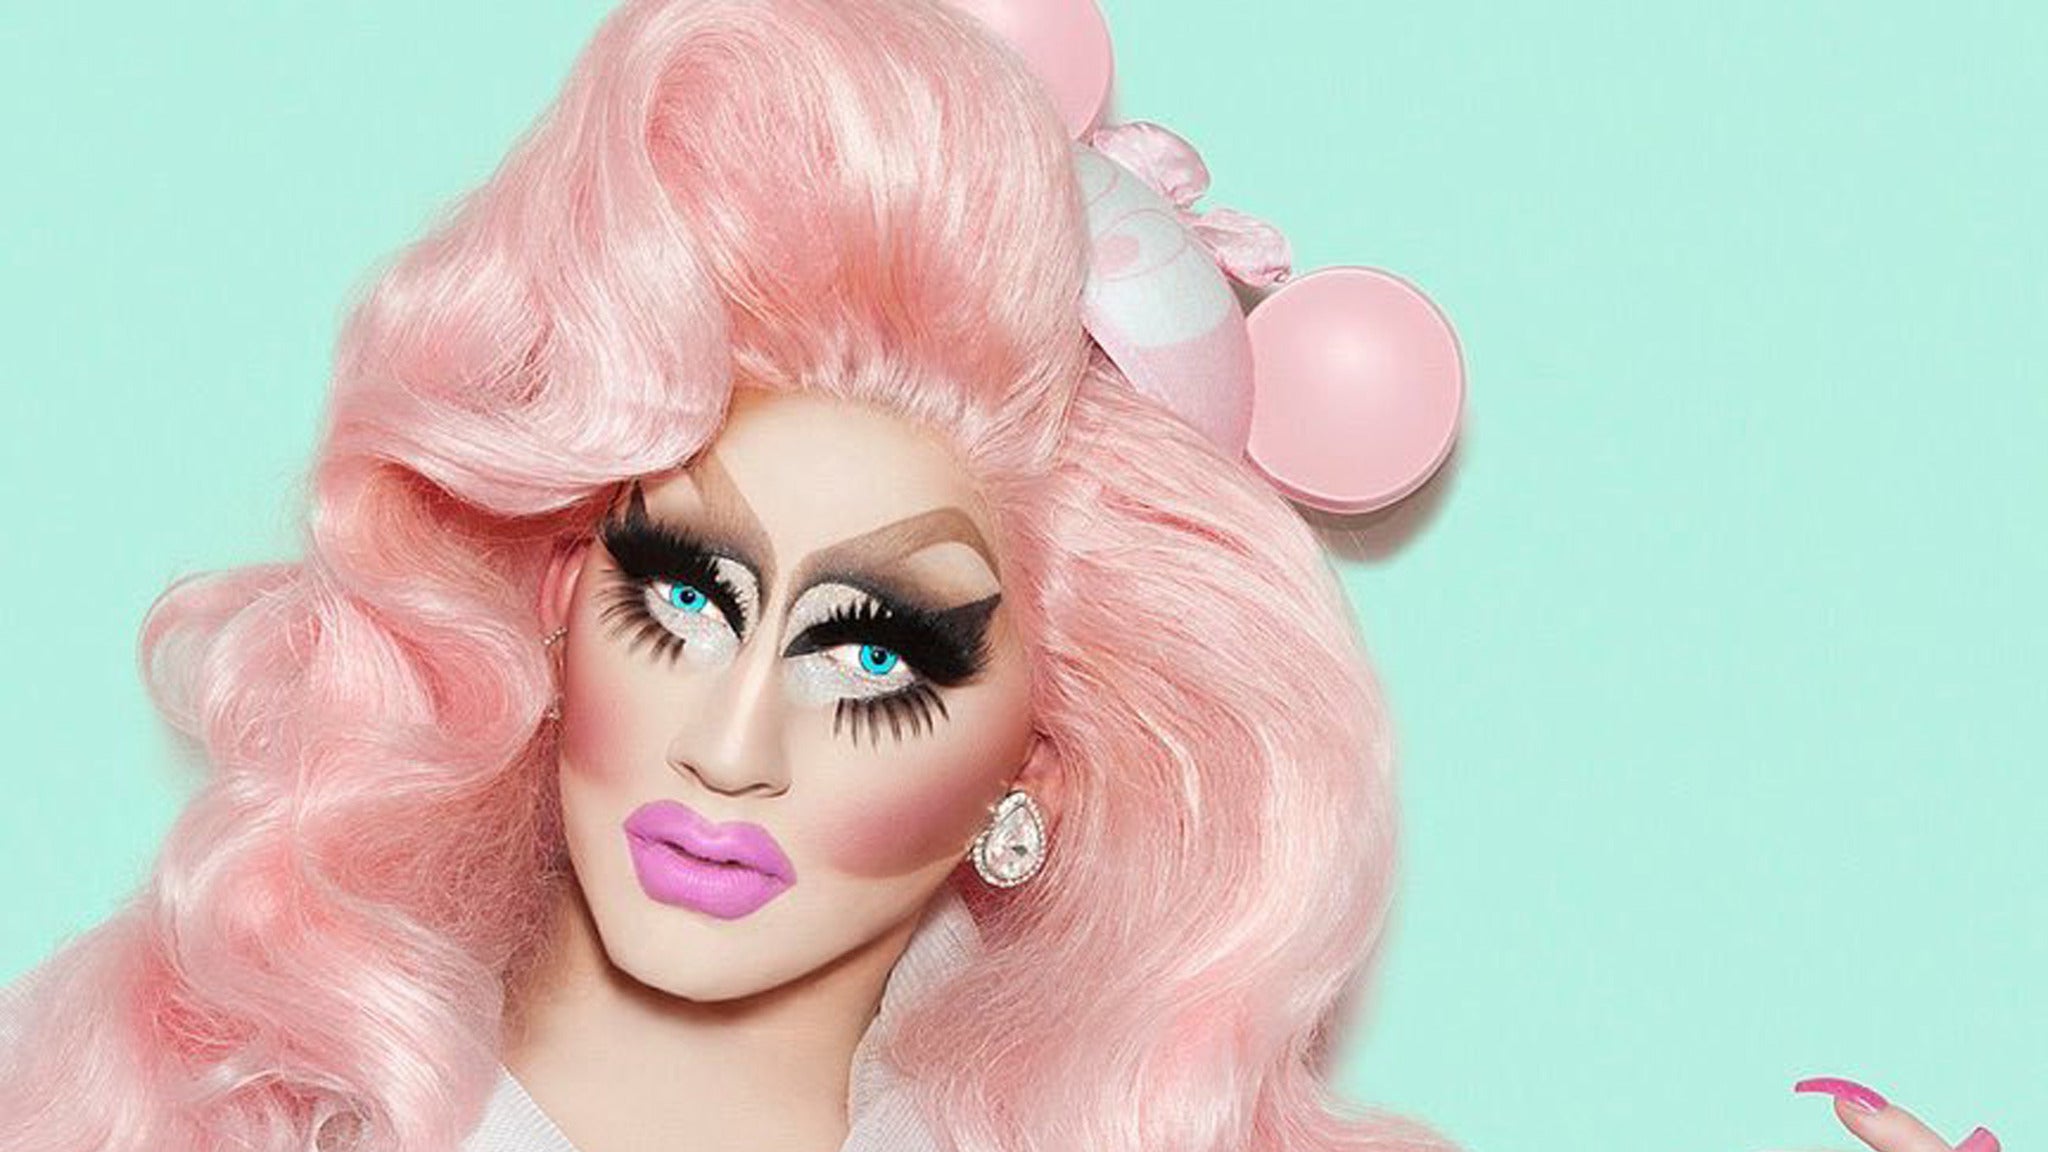 Trixie Mattel: Grown Up in Ft Lauderdale promo photo for Meet & Greet Experiences Onsale presale offer code